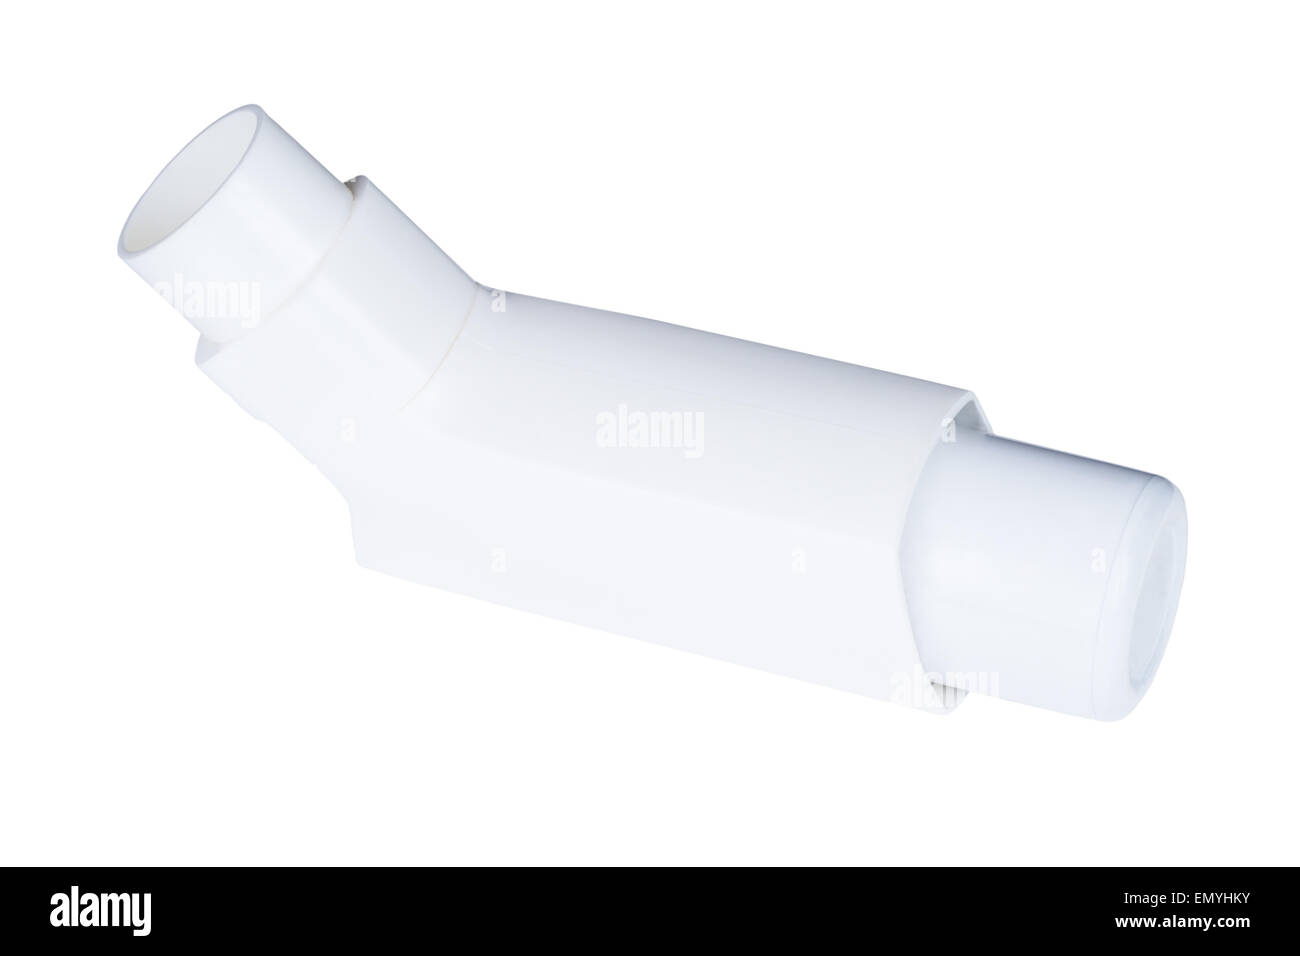 Asthma inhaler isolated on a white background Stock Photo